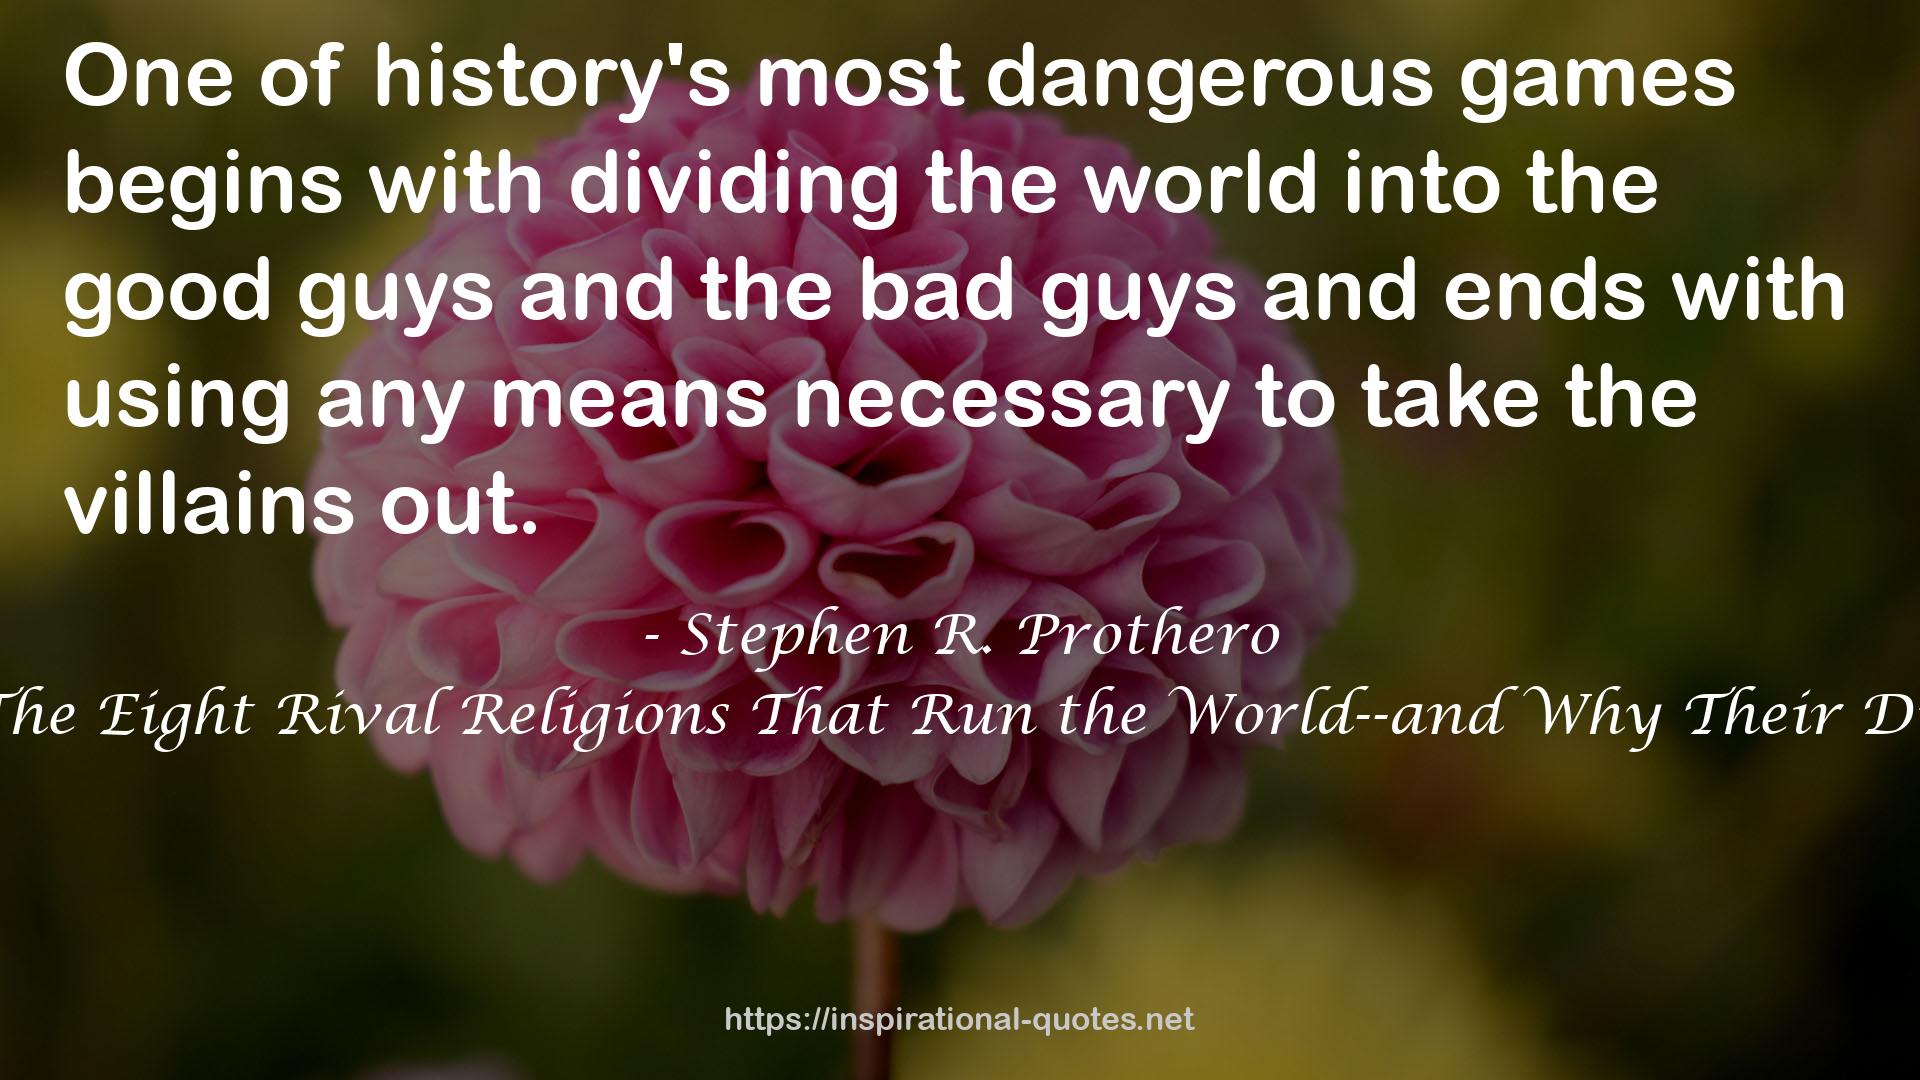 history's most dangerous games  QUOTES